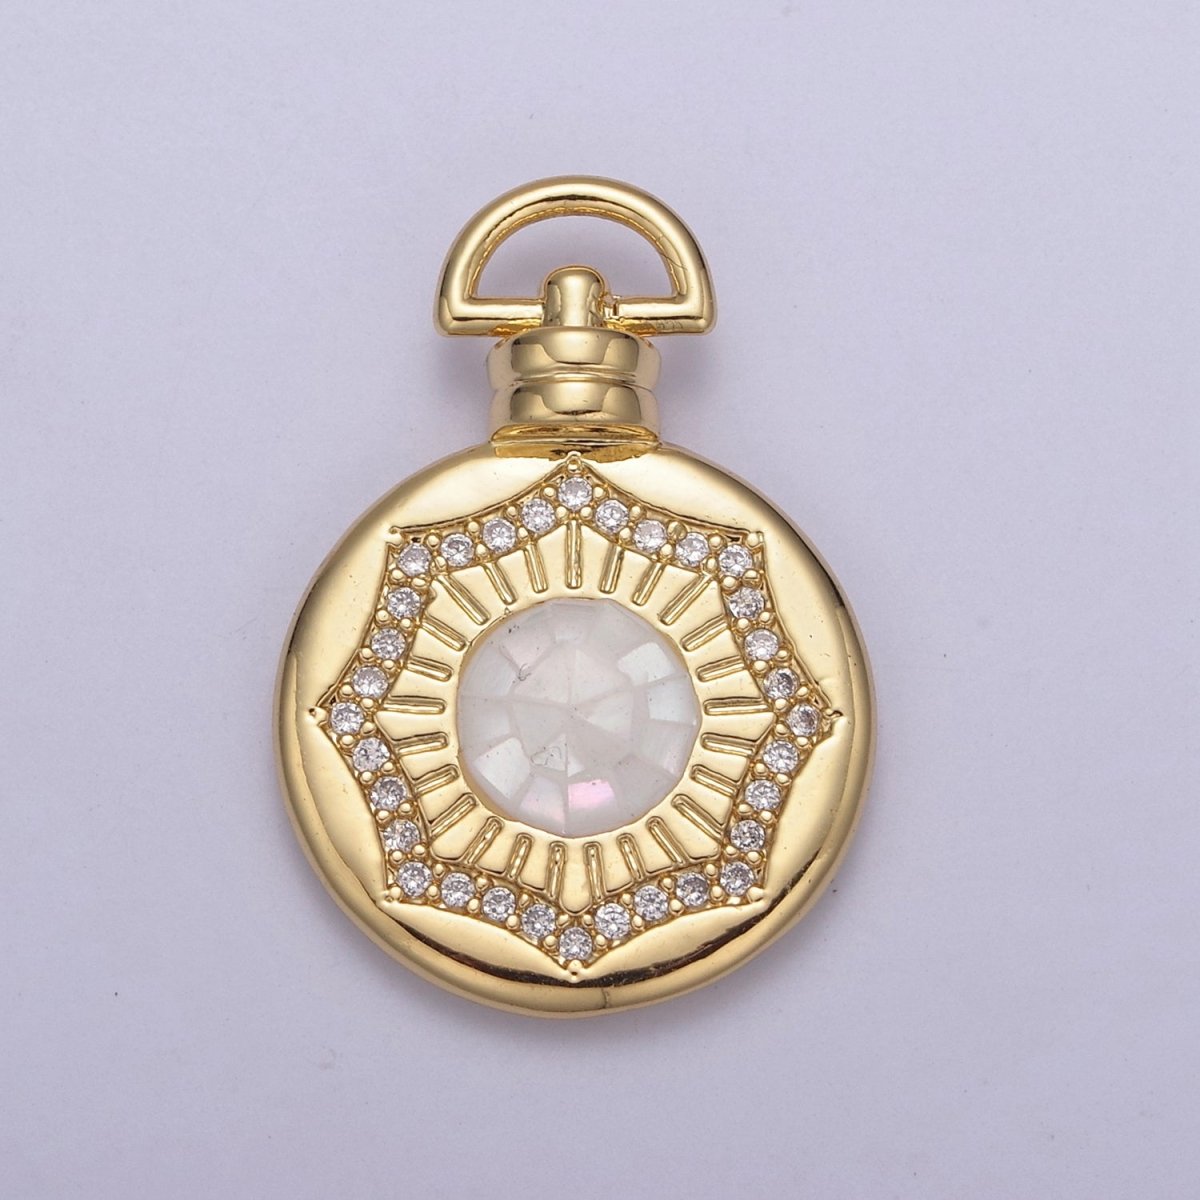 Dainty Gold Pink Shell Sun Pendant Micro Pave Round Medallion Pink / White Shell Celestial Jewelry Making H-717 H-726 - DLUXCA